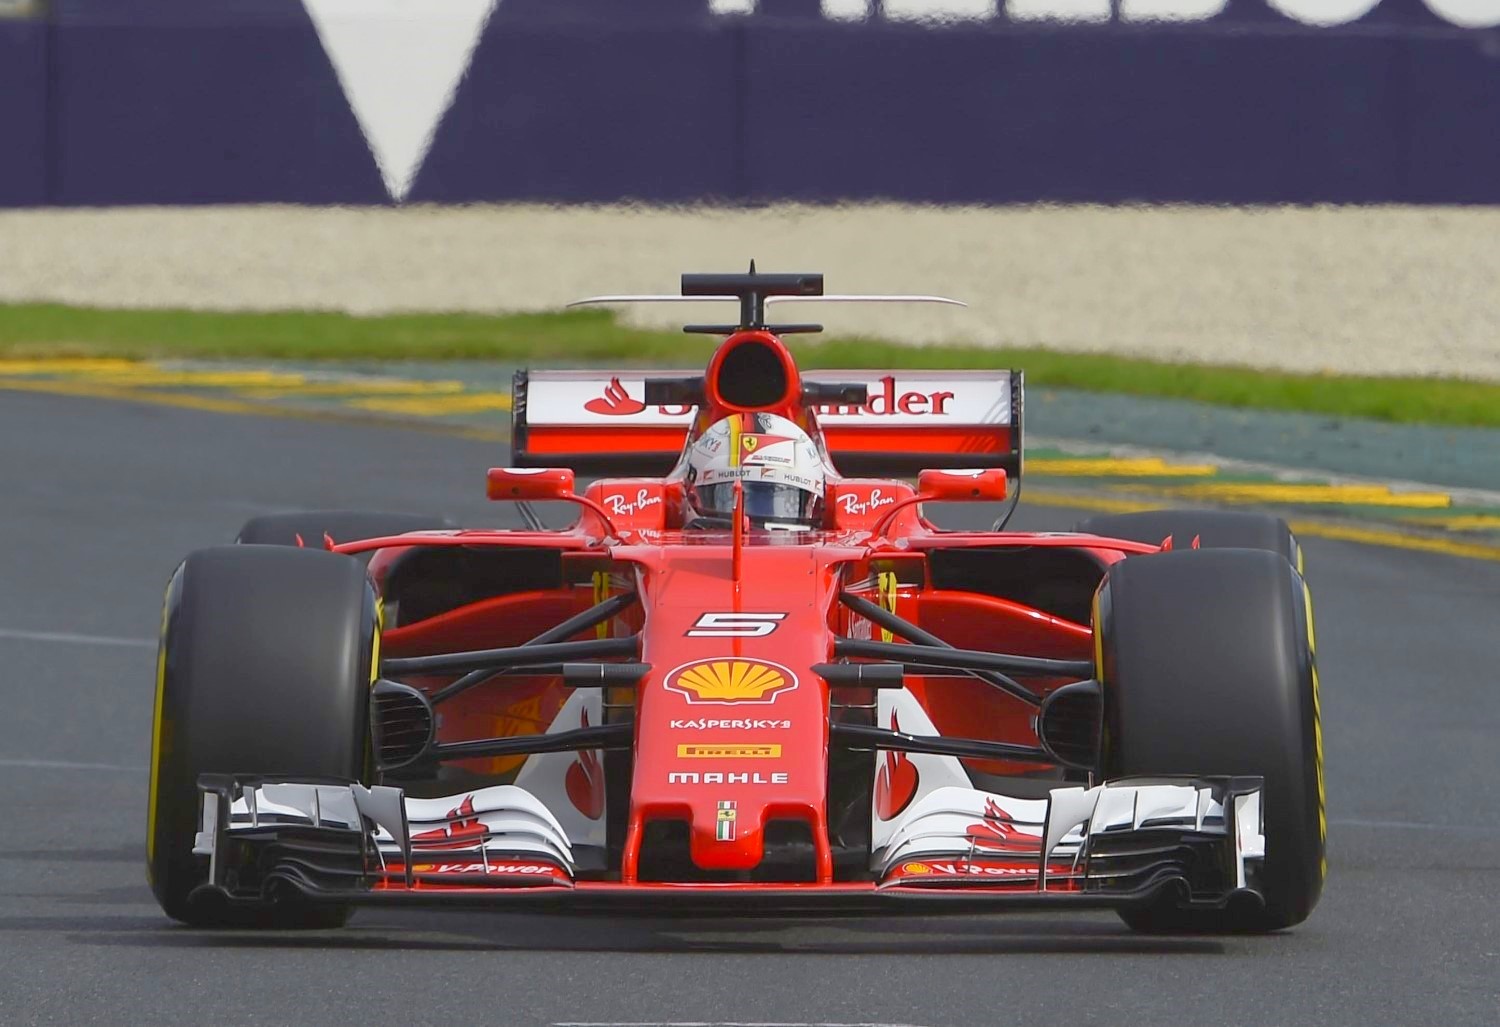 Vettel gave chase in the Ferrari but was no match for Hamilton on Friday